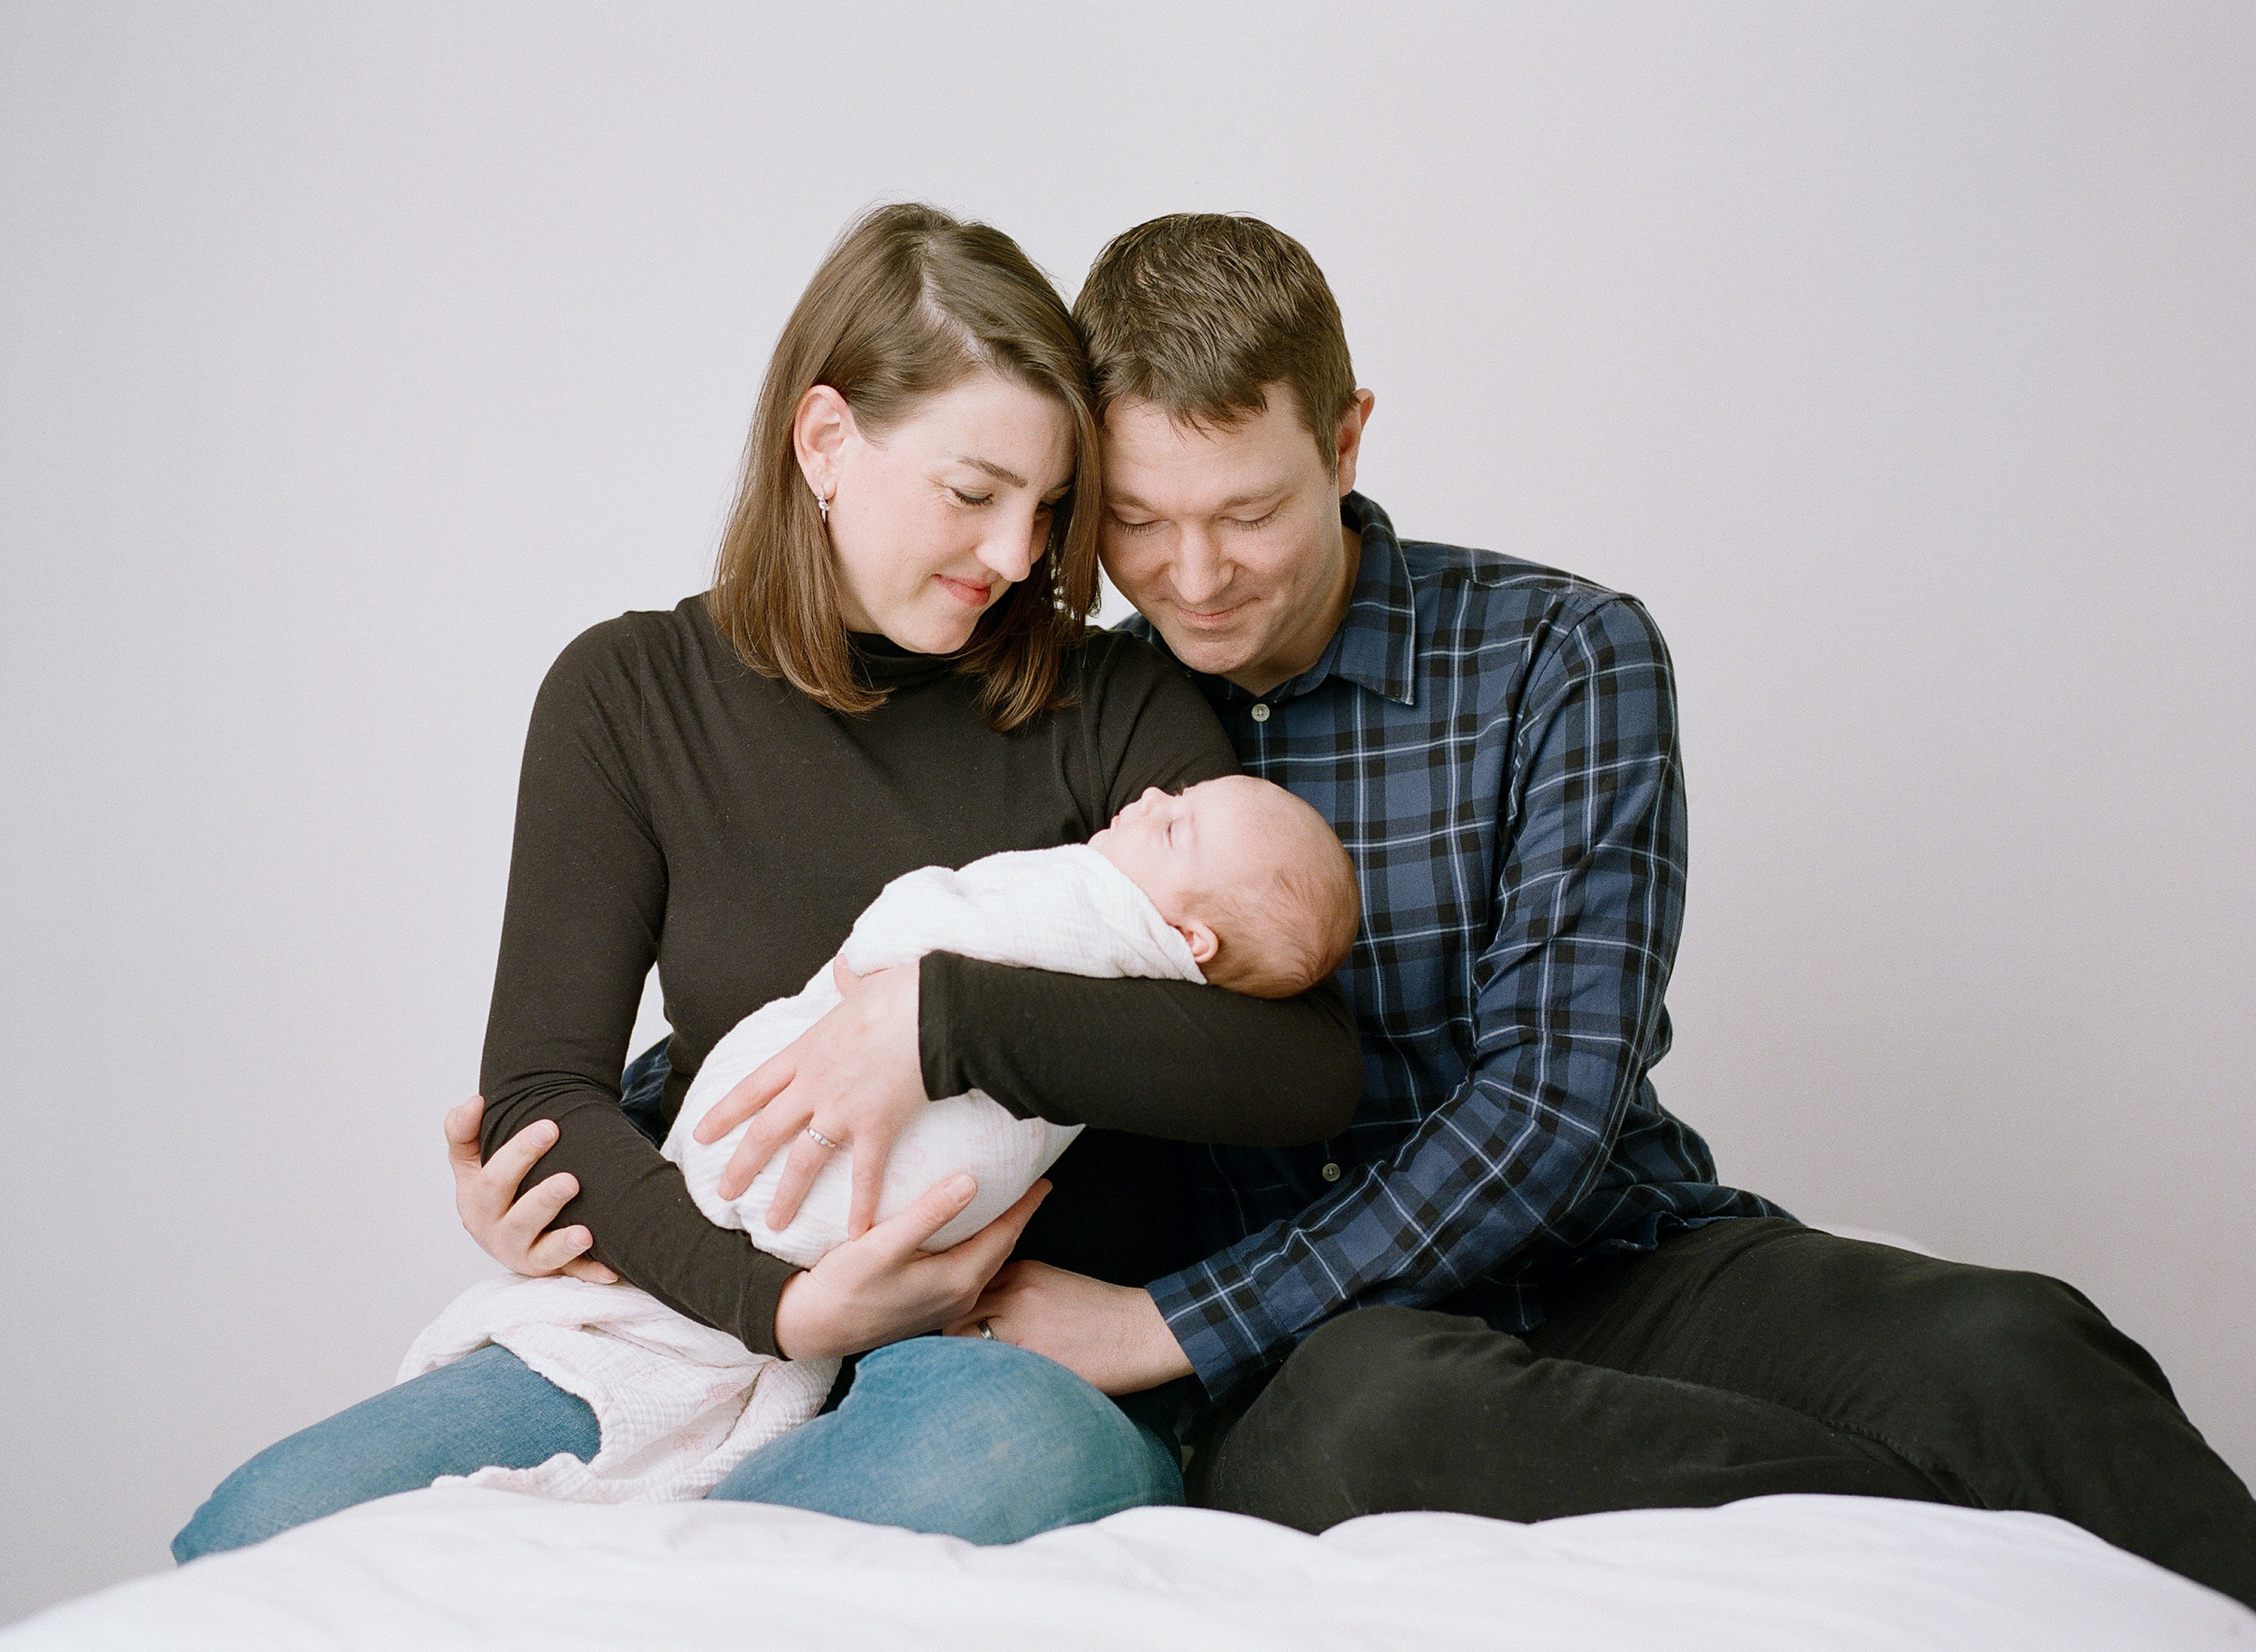 How to Order Custom Photo Albums from Your Family or Newborn Session, Newborn Photography Seattle